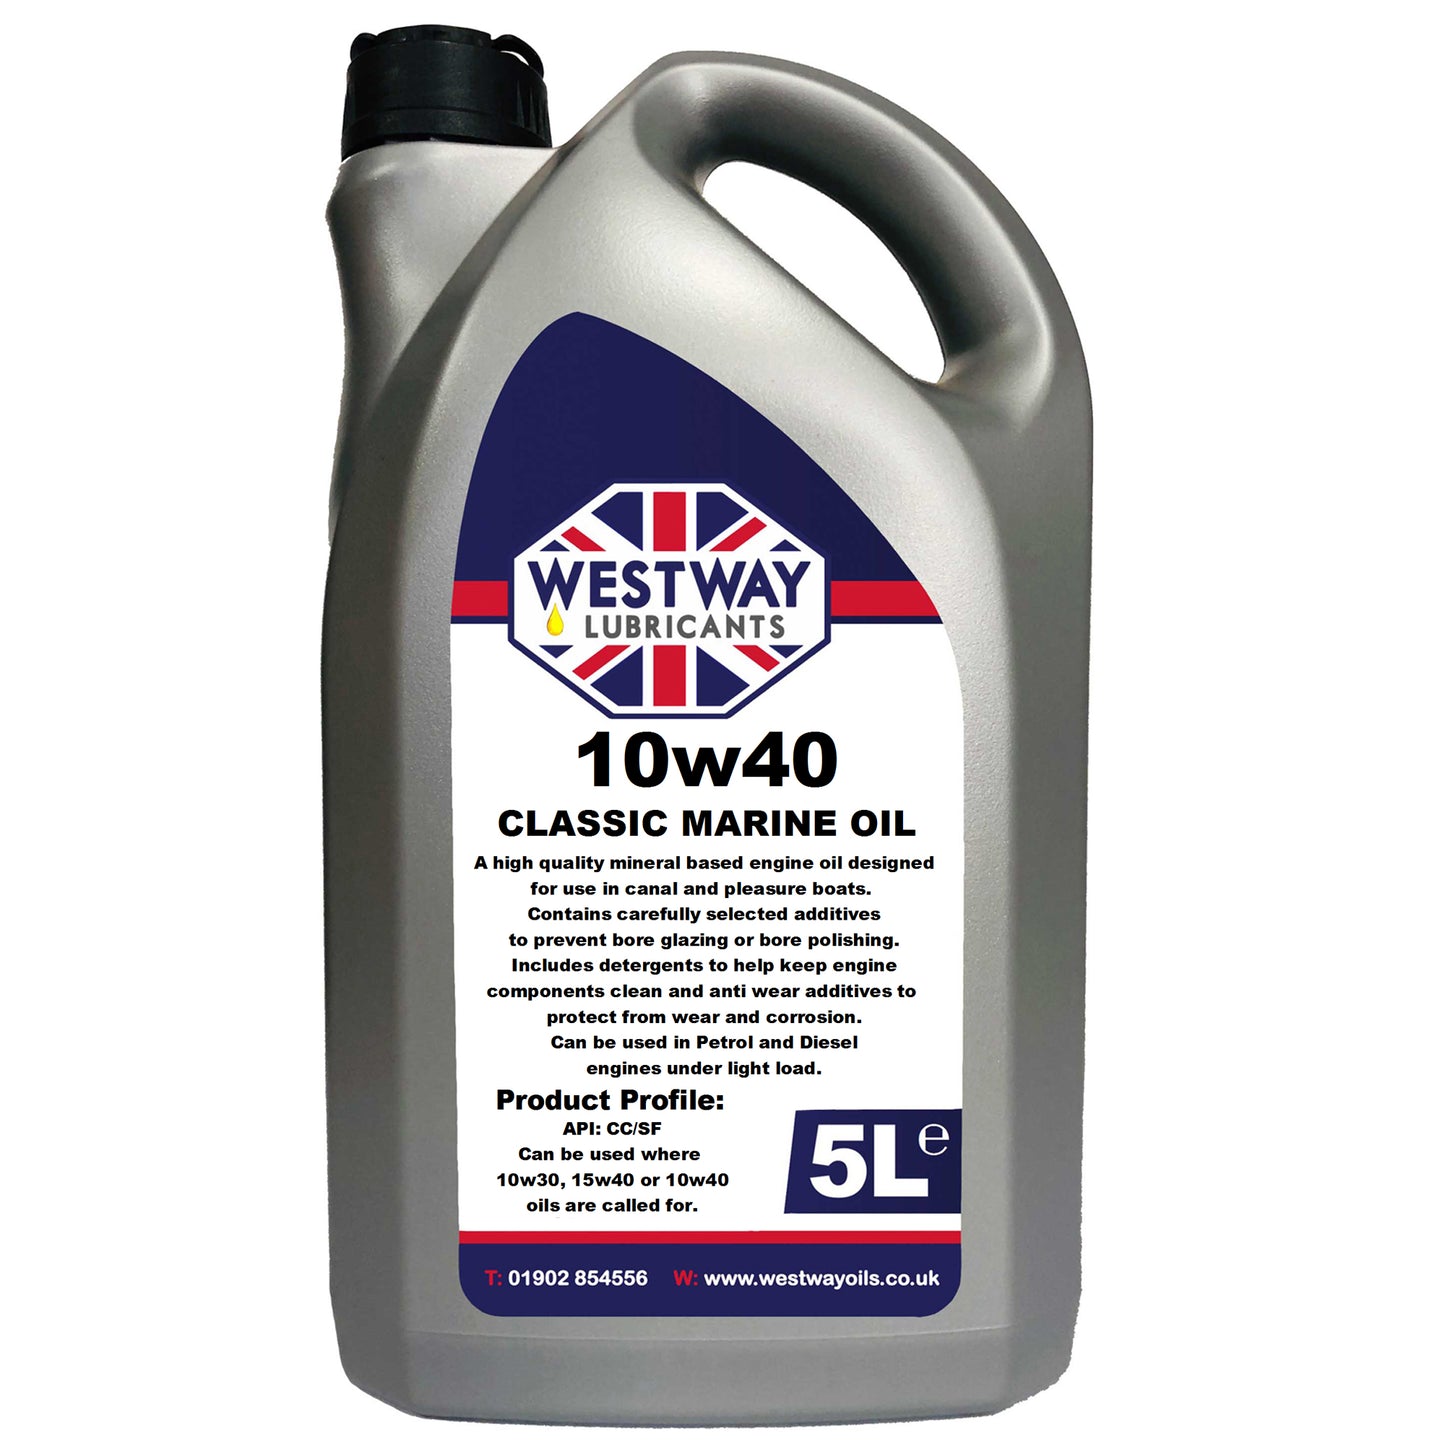 10w40 Mineral Marine Oil for Canal & Pleasure Boats